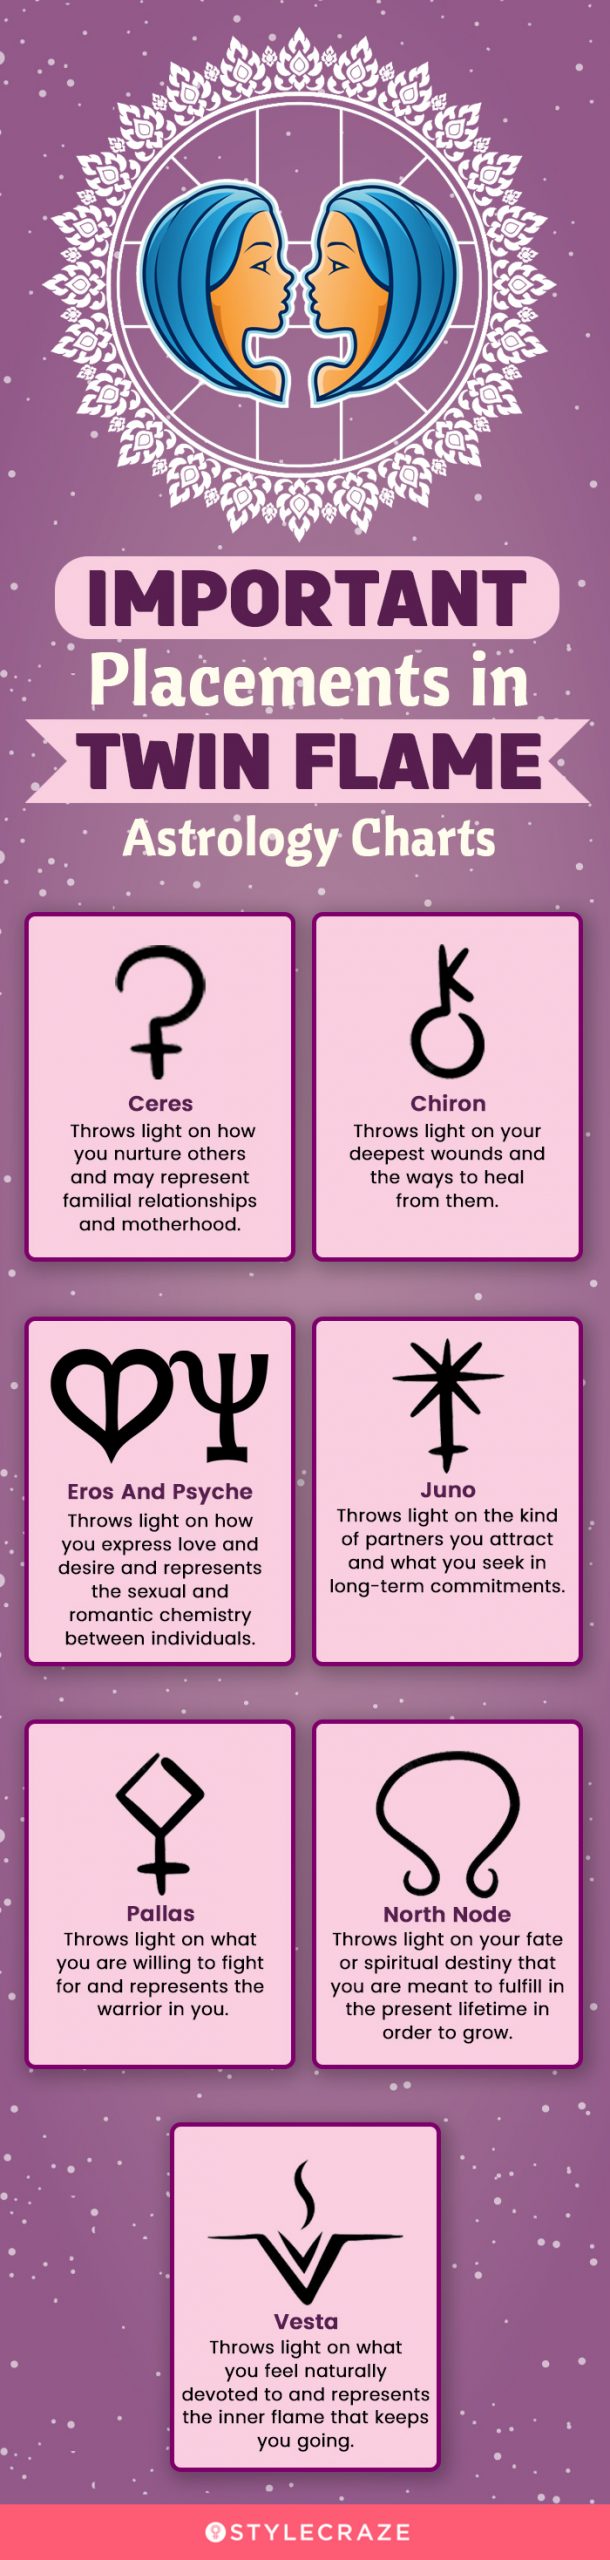 important placements in twin flame astrology charts (infographic)